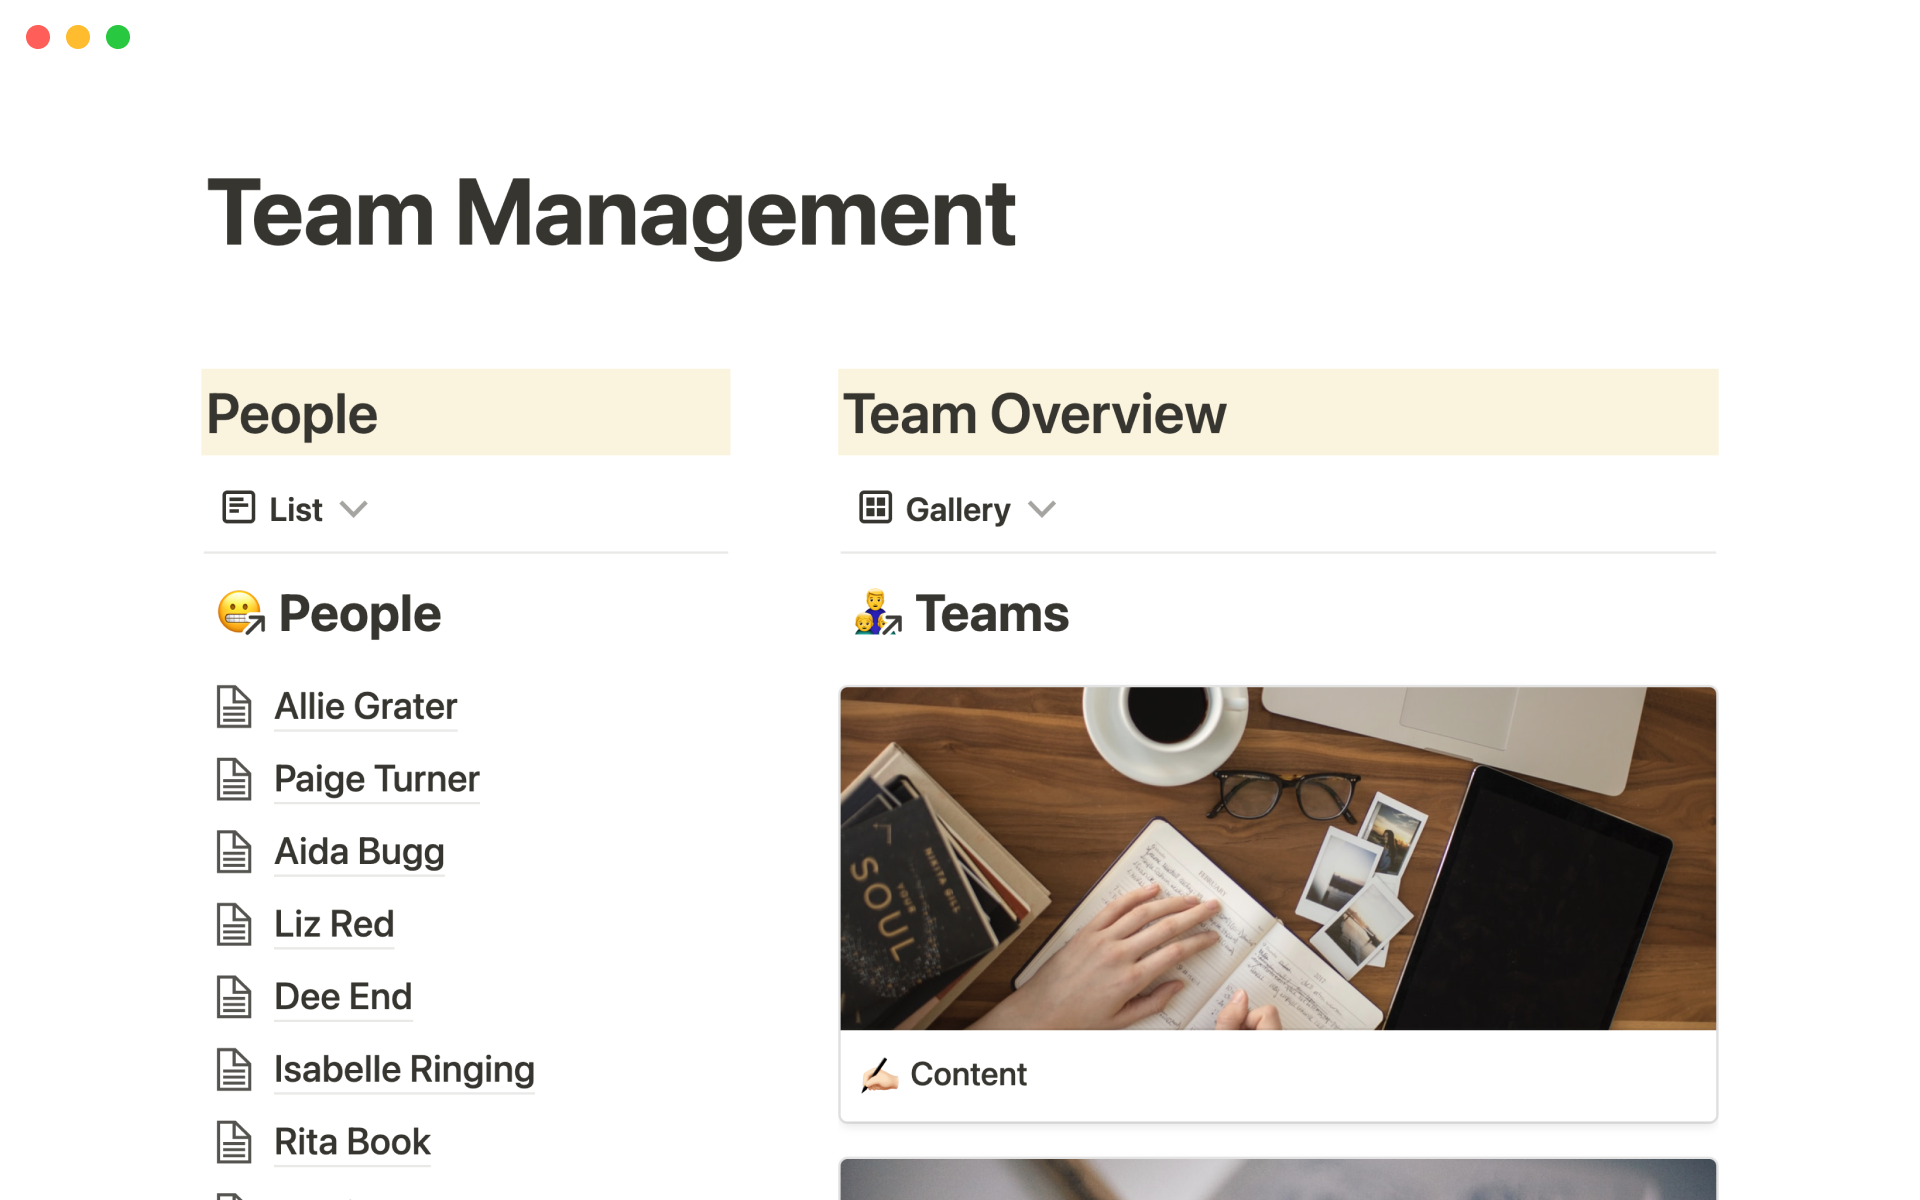 The one-stop solution for company, team, and individual OKR management.